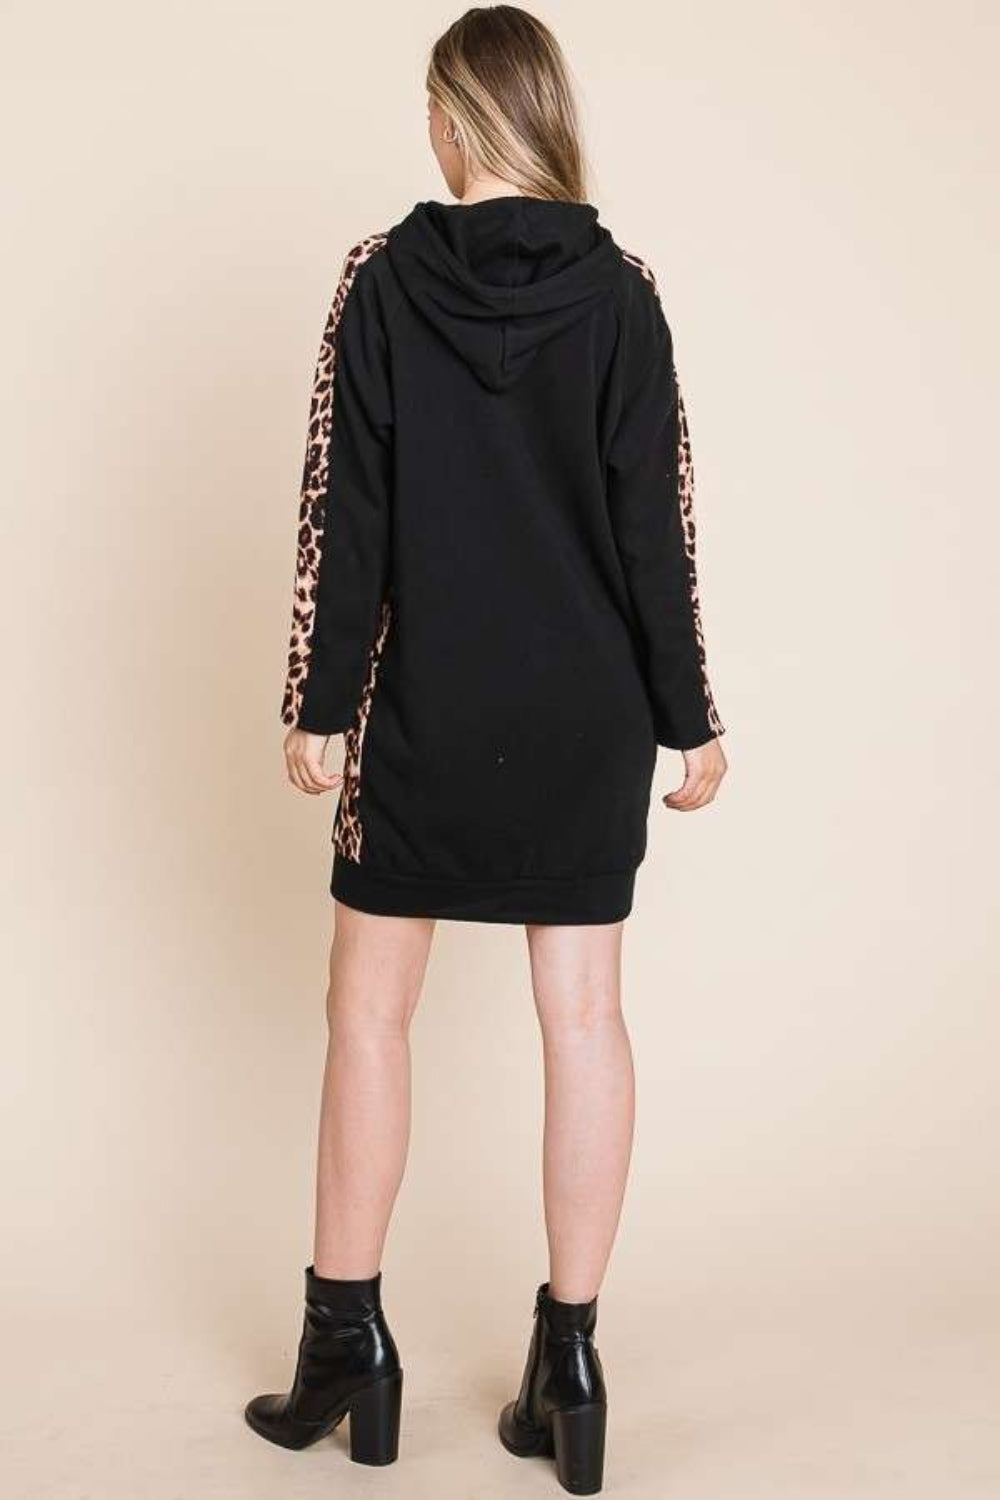 Blue Zone Planet |  Culture Code Drawstring Leopard Long Sleeve Hooded Dress BLUE ZONE PLANET